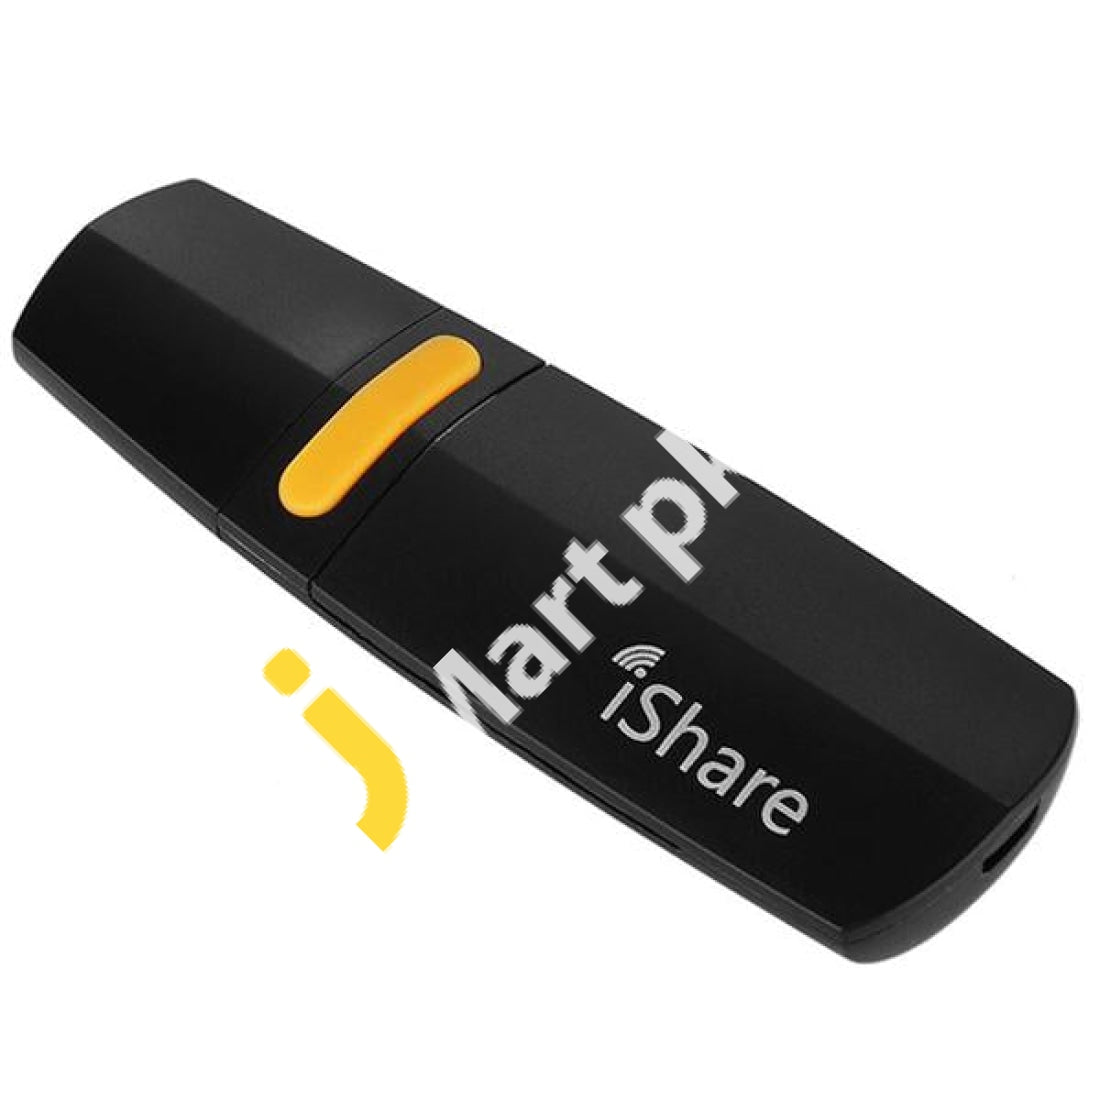 Ishare Wt600 Wifi Hdmi Streaming Media Player Share Miracast Dlna Ezcast Imported From Uk